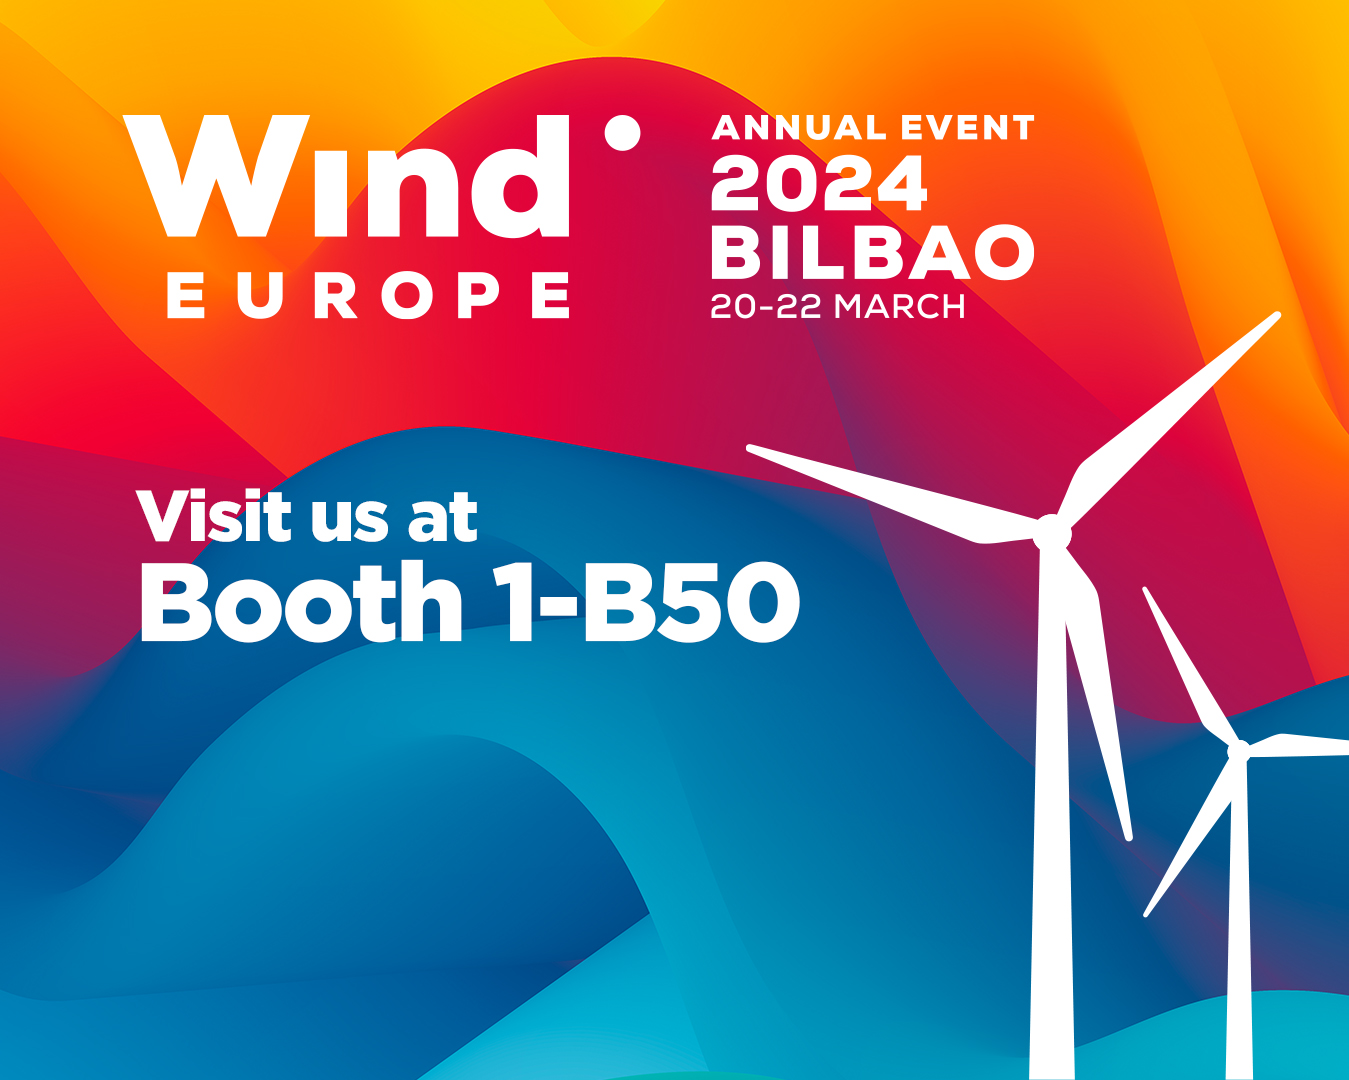 RENOGEAR WILL ATTEND WIND EUROPE 2024 IN BILBAO FROM MARCH 20th TILL 22nd